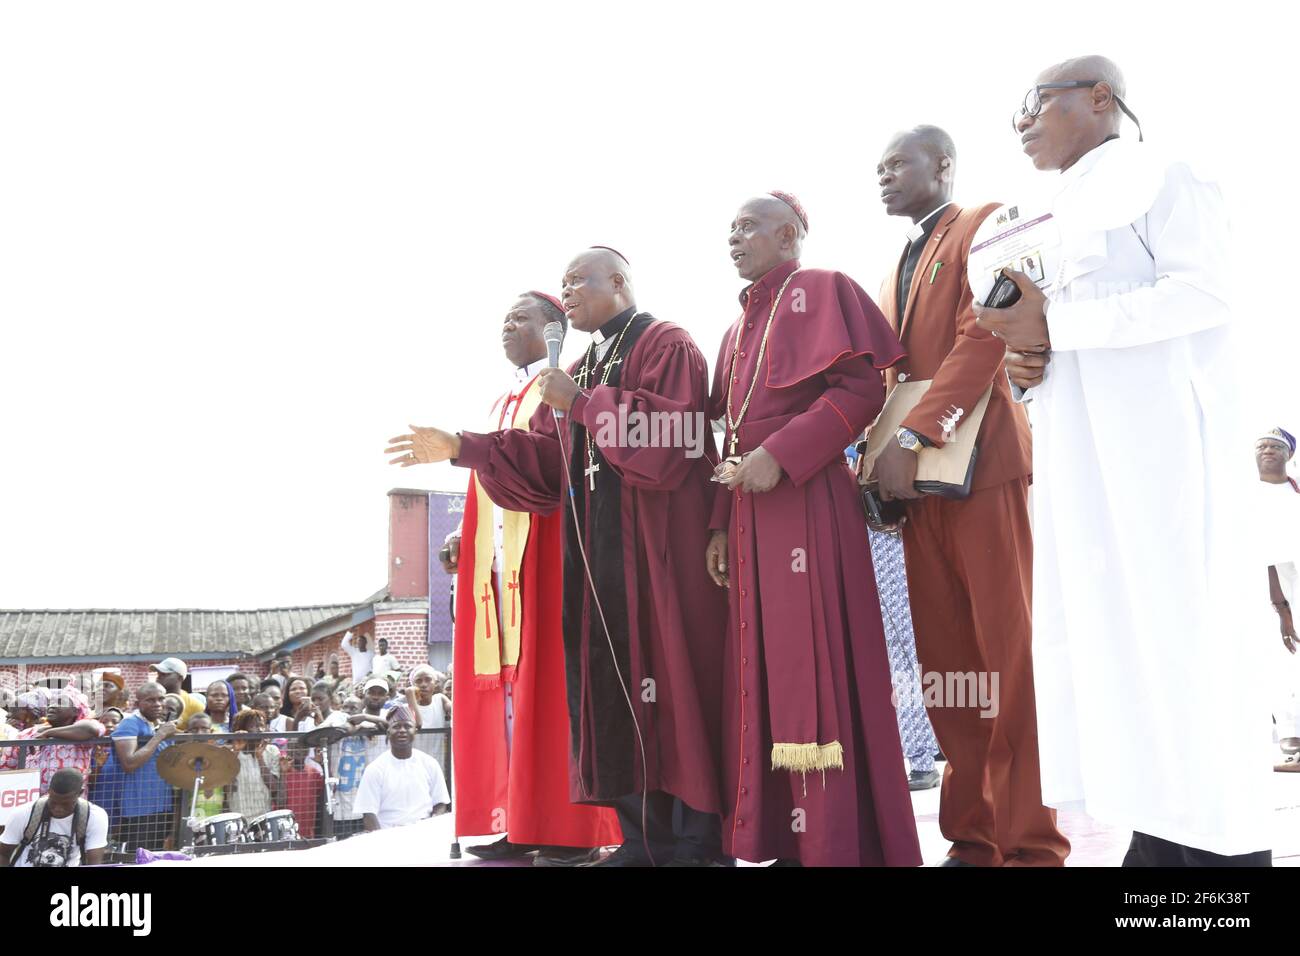 Religious Leaders paying homage to Ooni of Ife during the Olojo Festival, Ile-Ife, Osun State, Nigeria. Stock Photo